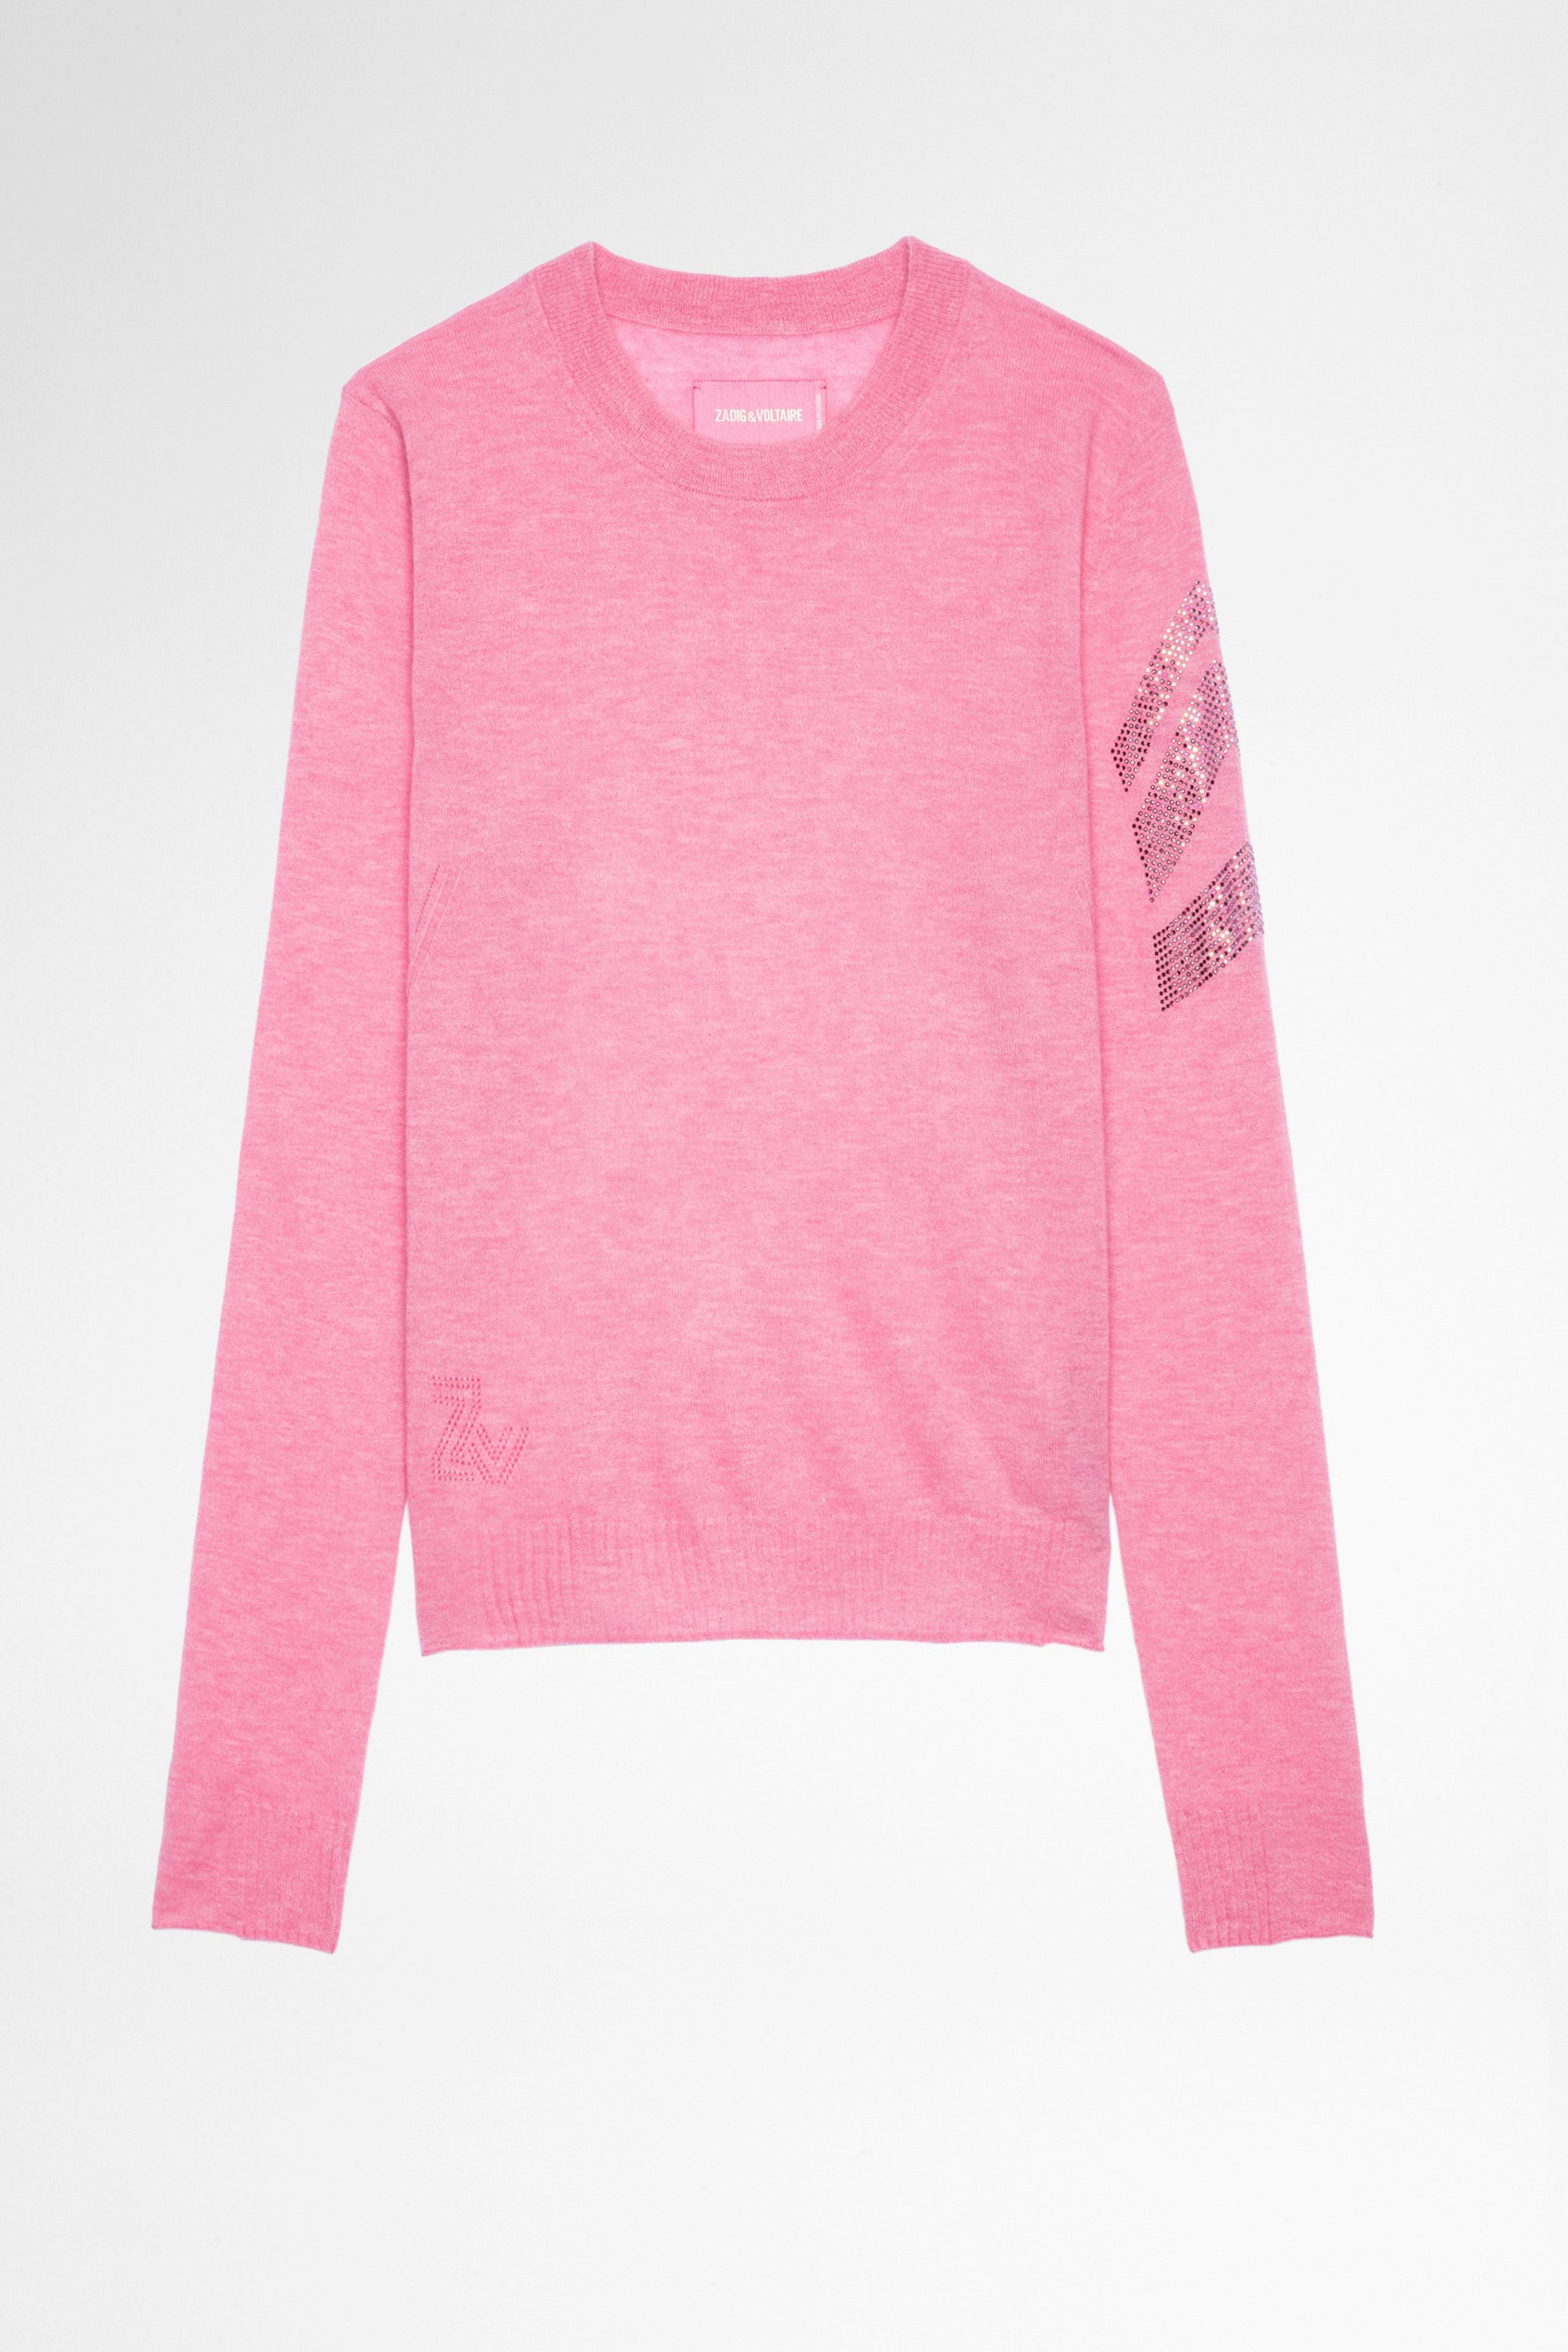 Miss CP Arrow Sweater Strass Cashmere Women's pink cashmere sweater with arrow pattern